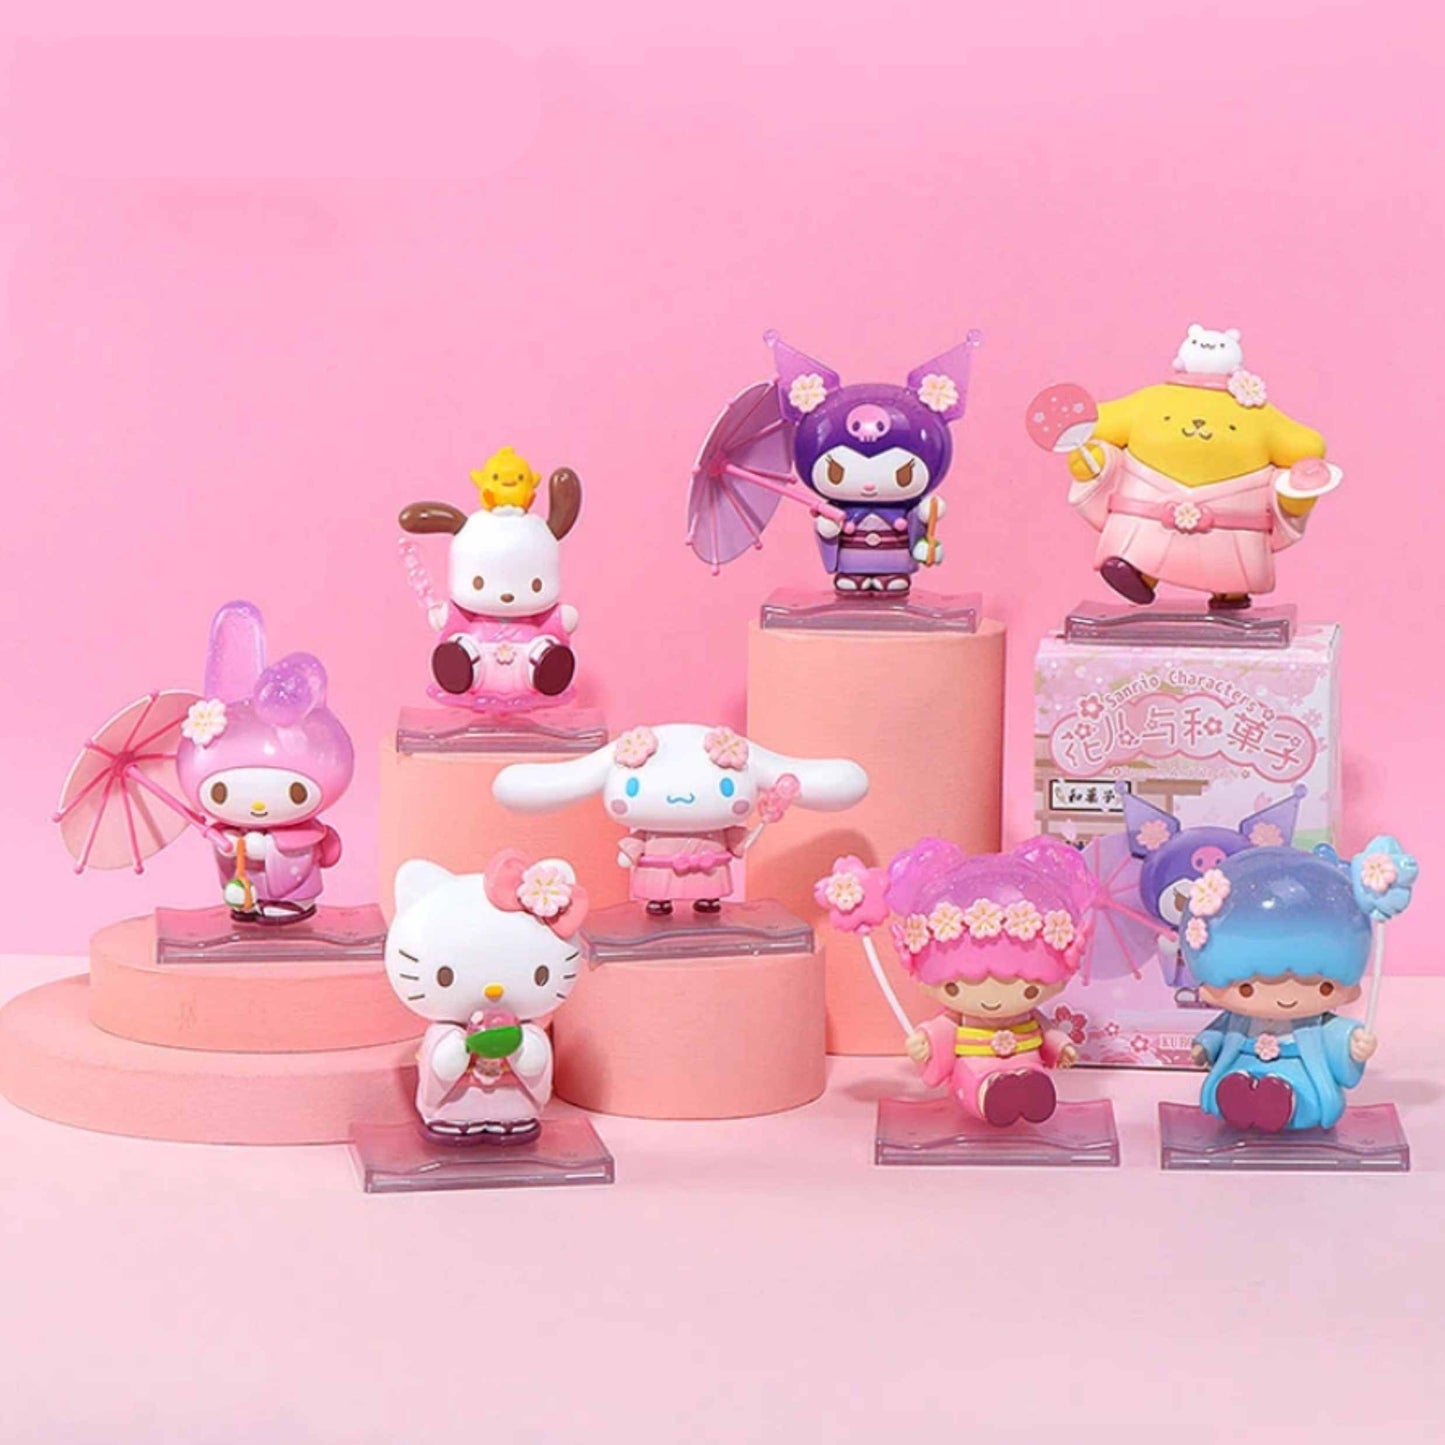 【Restock】Top Toy Sanrio Blossom and Wagashi Series Blind Box Random Style